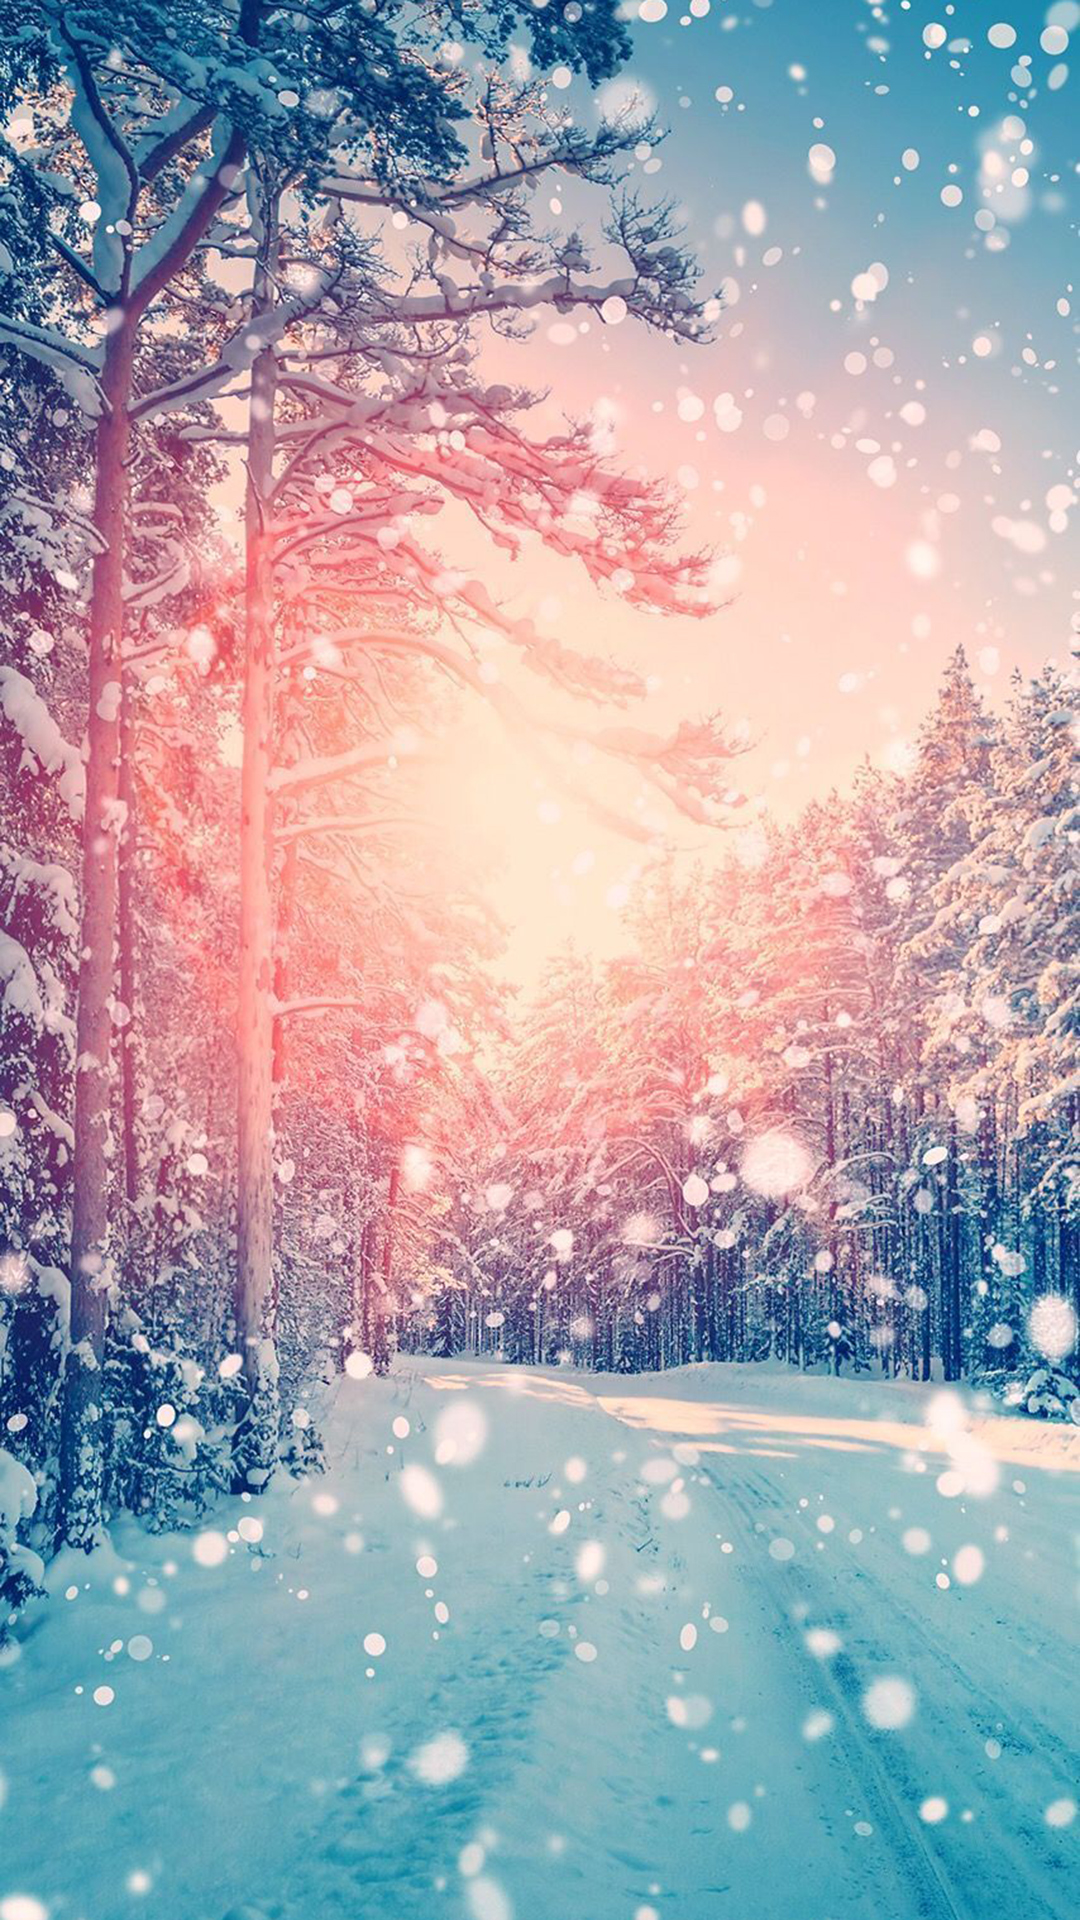 50 Gorgeous Winter Wallpaper Downloads For iPhone FREE  Christmas phone  wallpaper Wallpaper iphone christmas Winter wallpaper